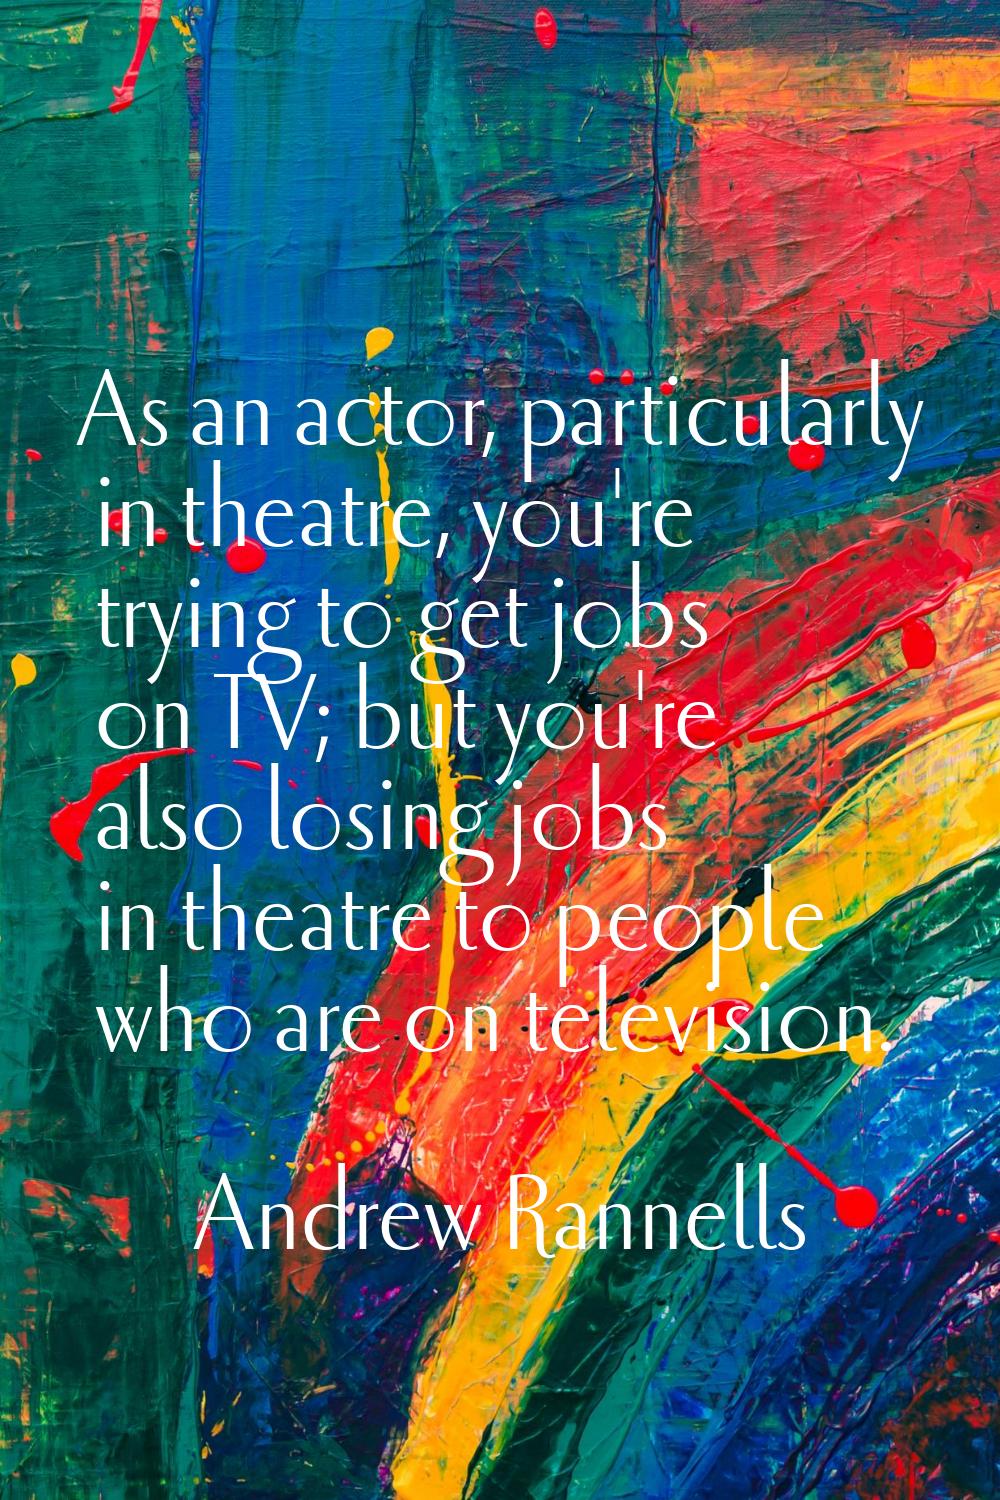 As an actor, particularly in theatre, you're trying to get jobs on TV; but you're also losing jobs 